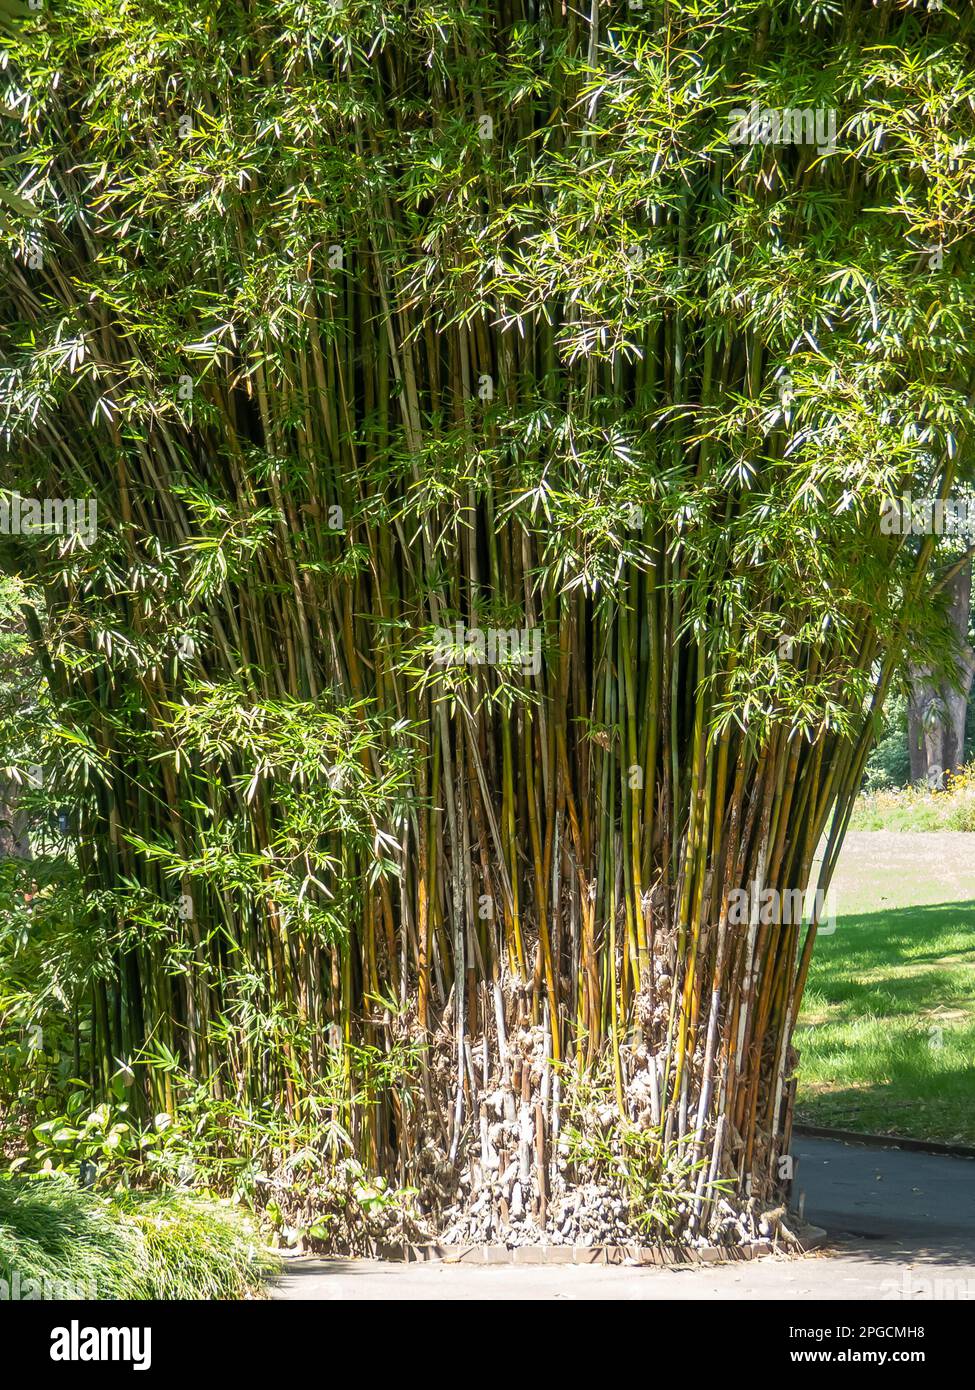 Clusters of Bamboo in the Sydney Botanical Gardens Stock Photo